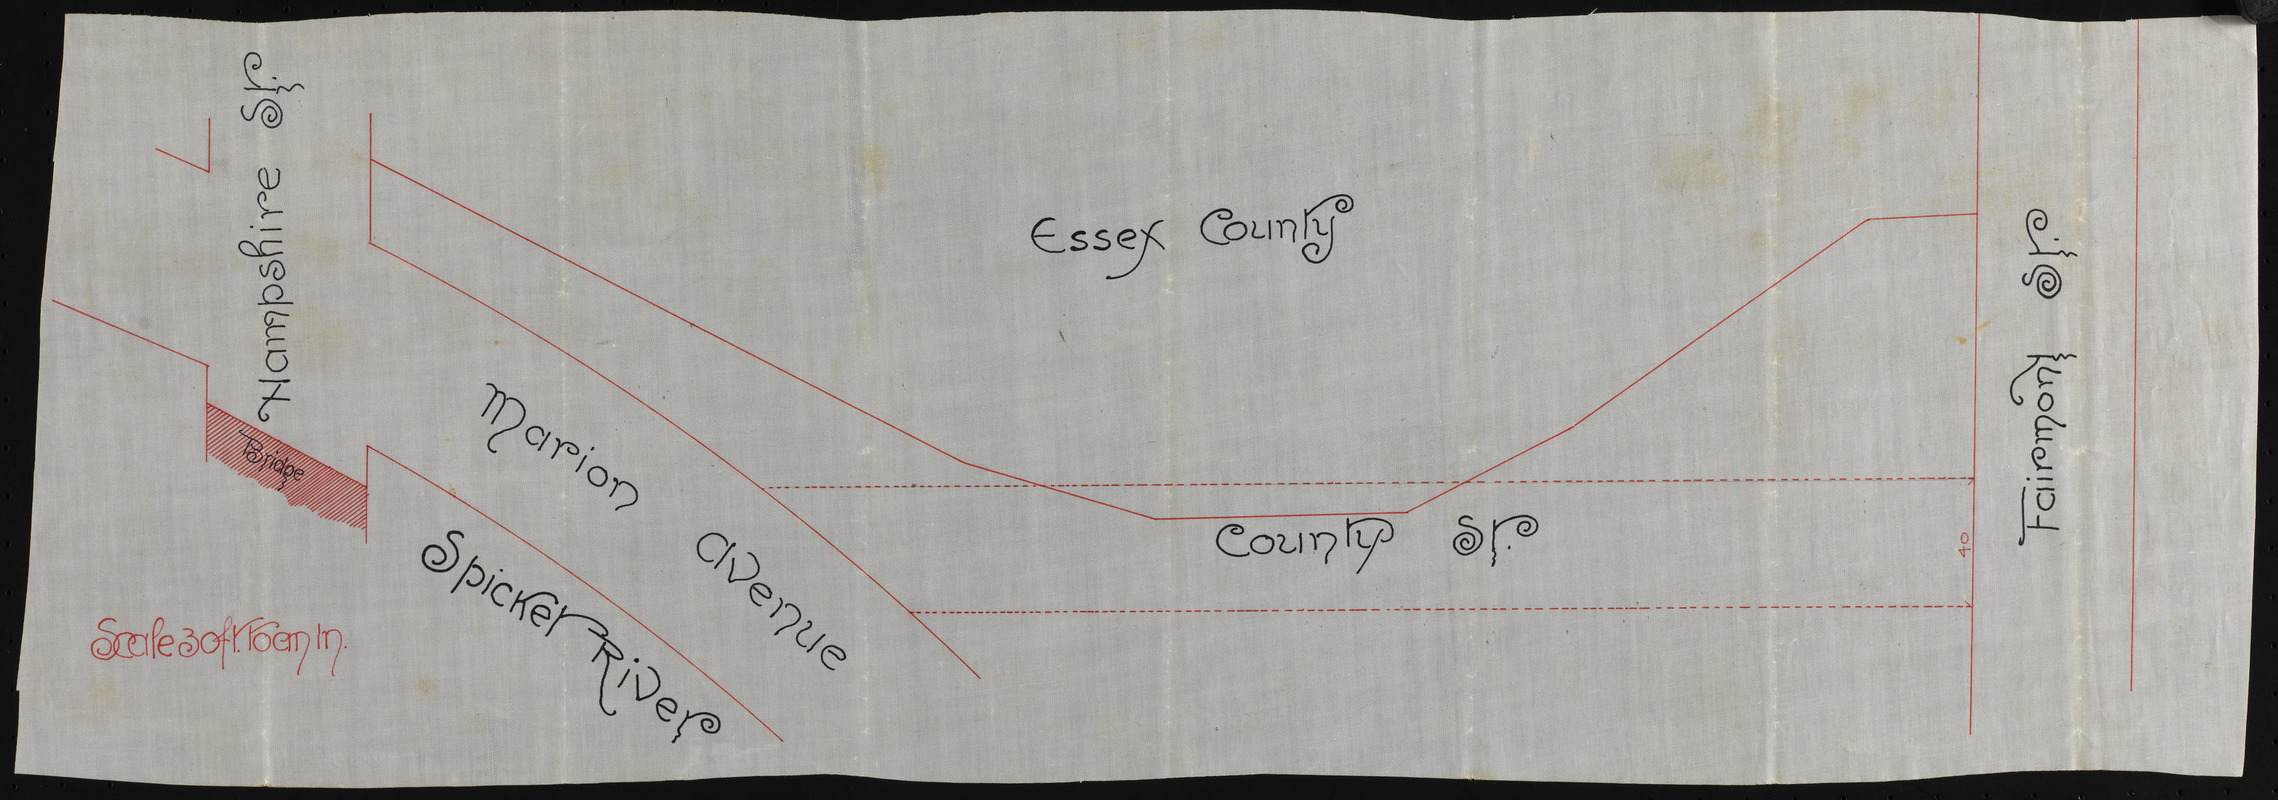 Description of land to be sold the County of Essex between Hampshire and Fairmont Streets south of the county jail